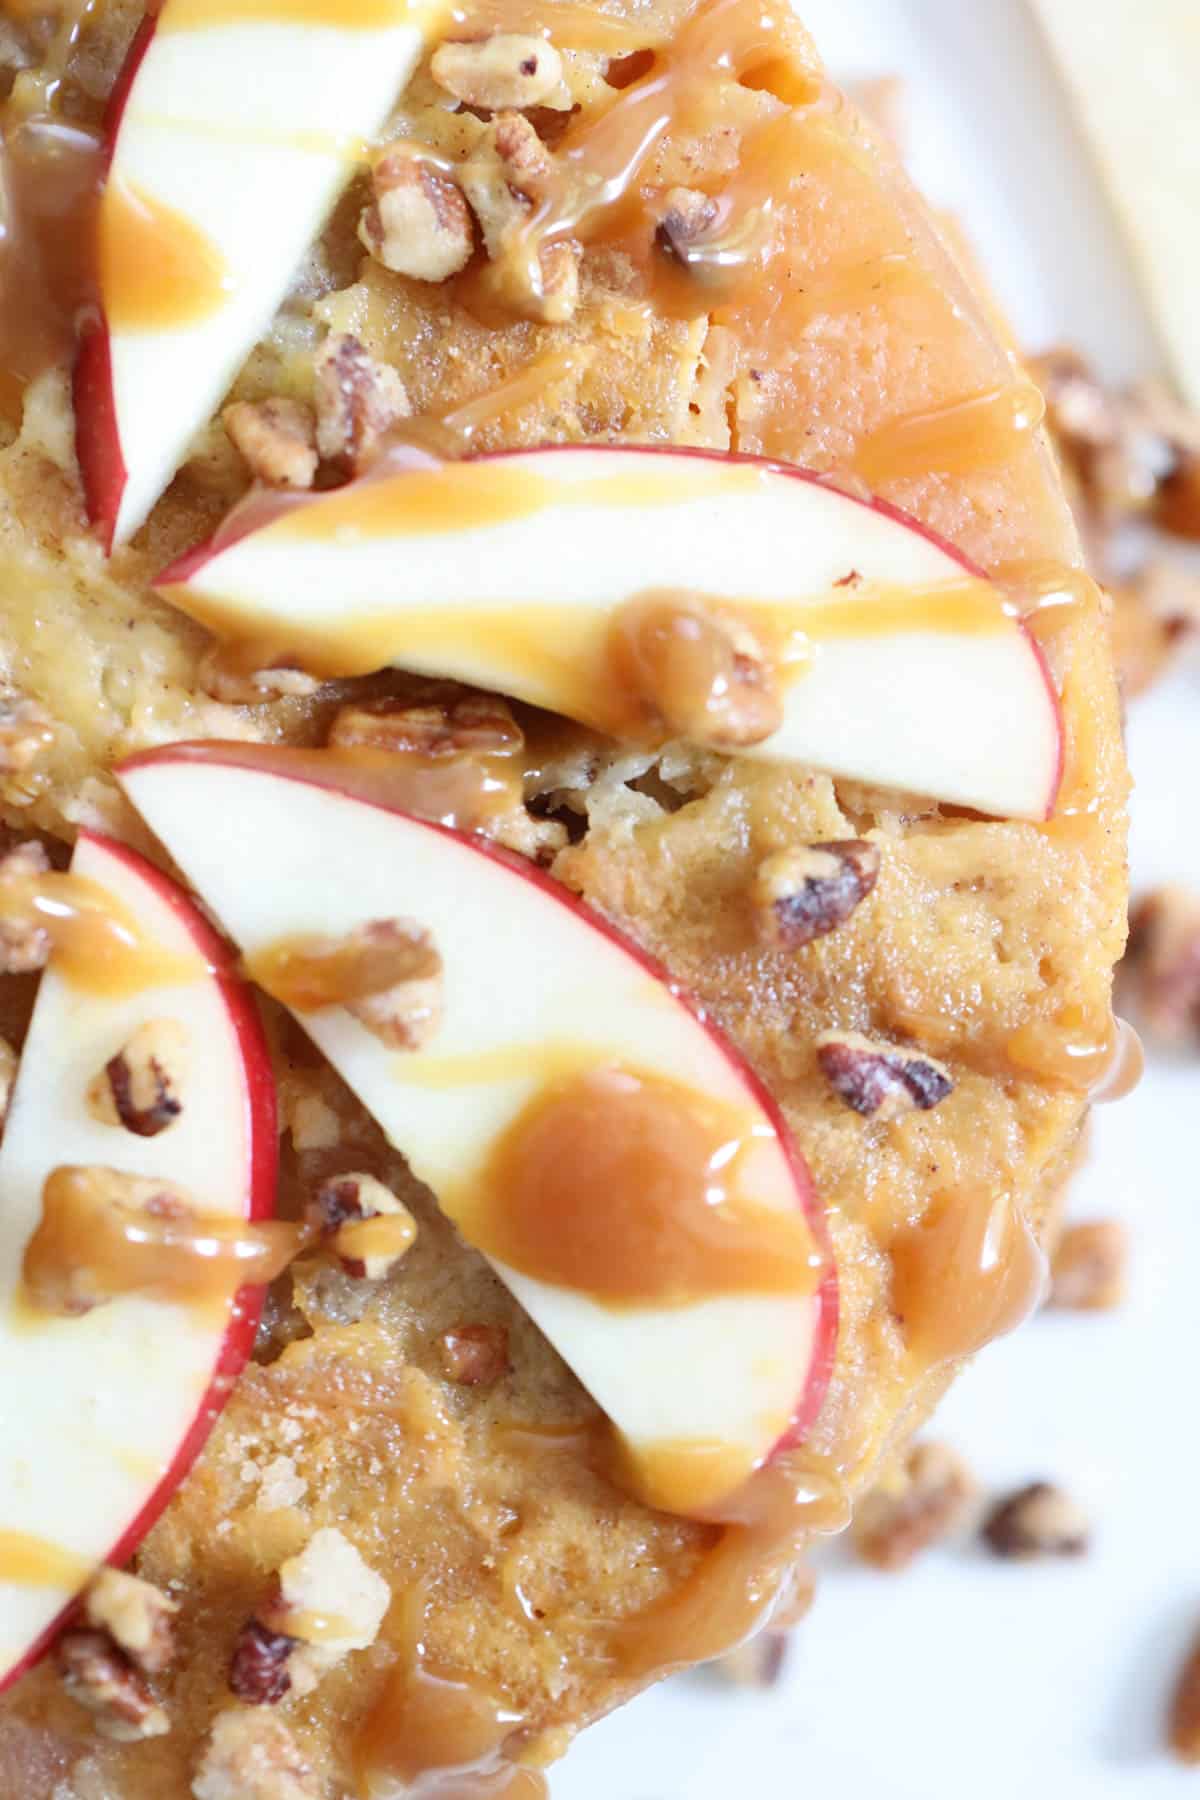 apple bread pudding with thin apple slices and caramelized nuts with caramel drizzle